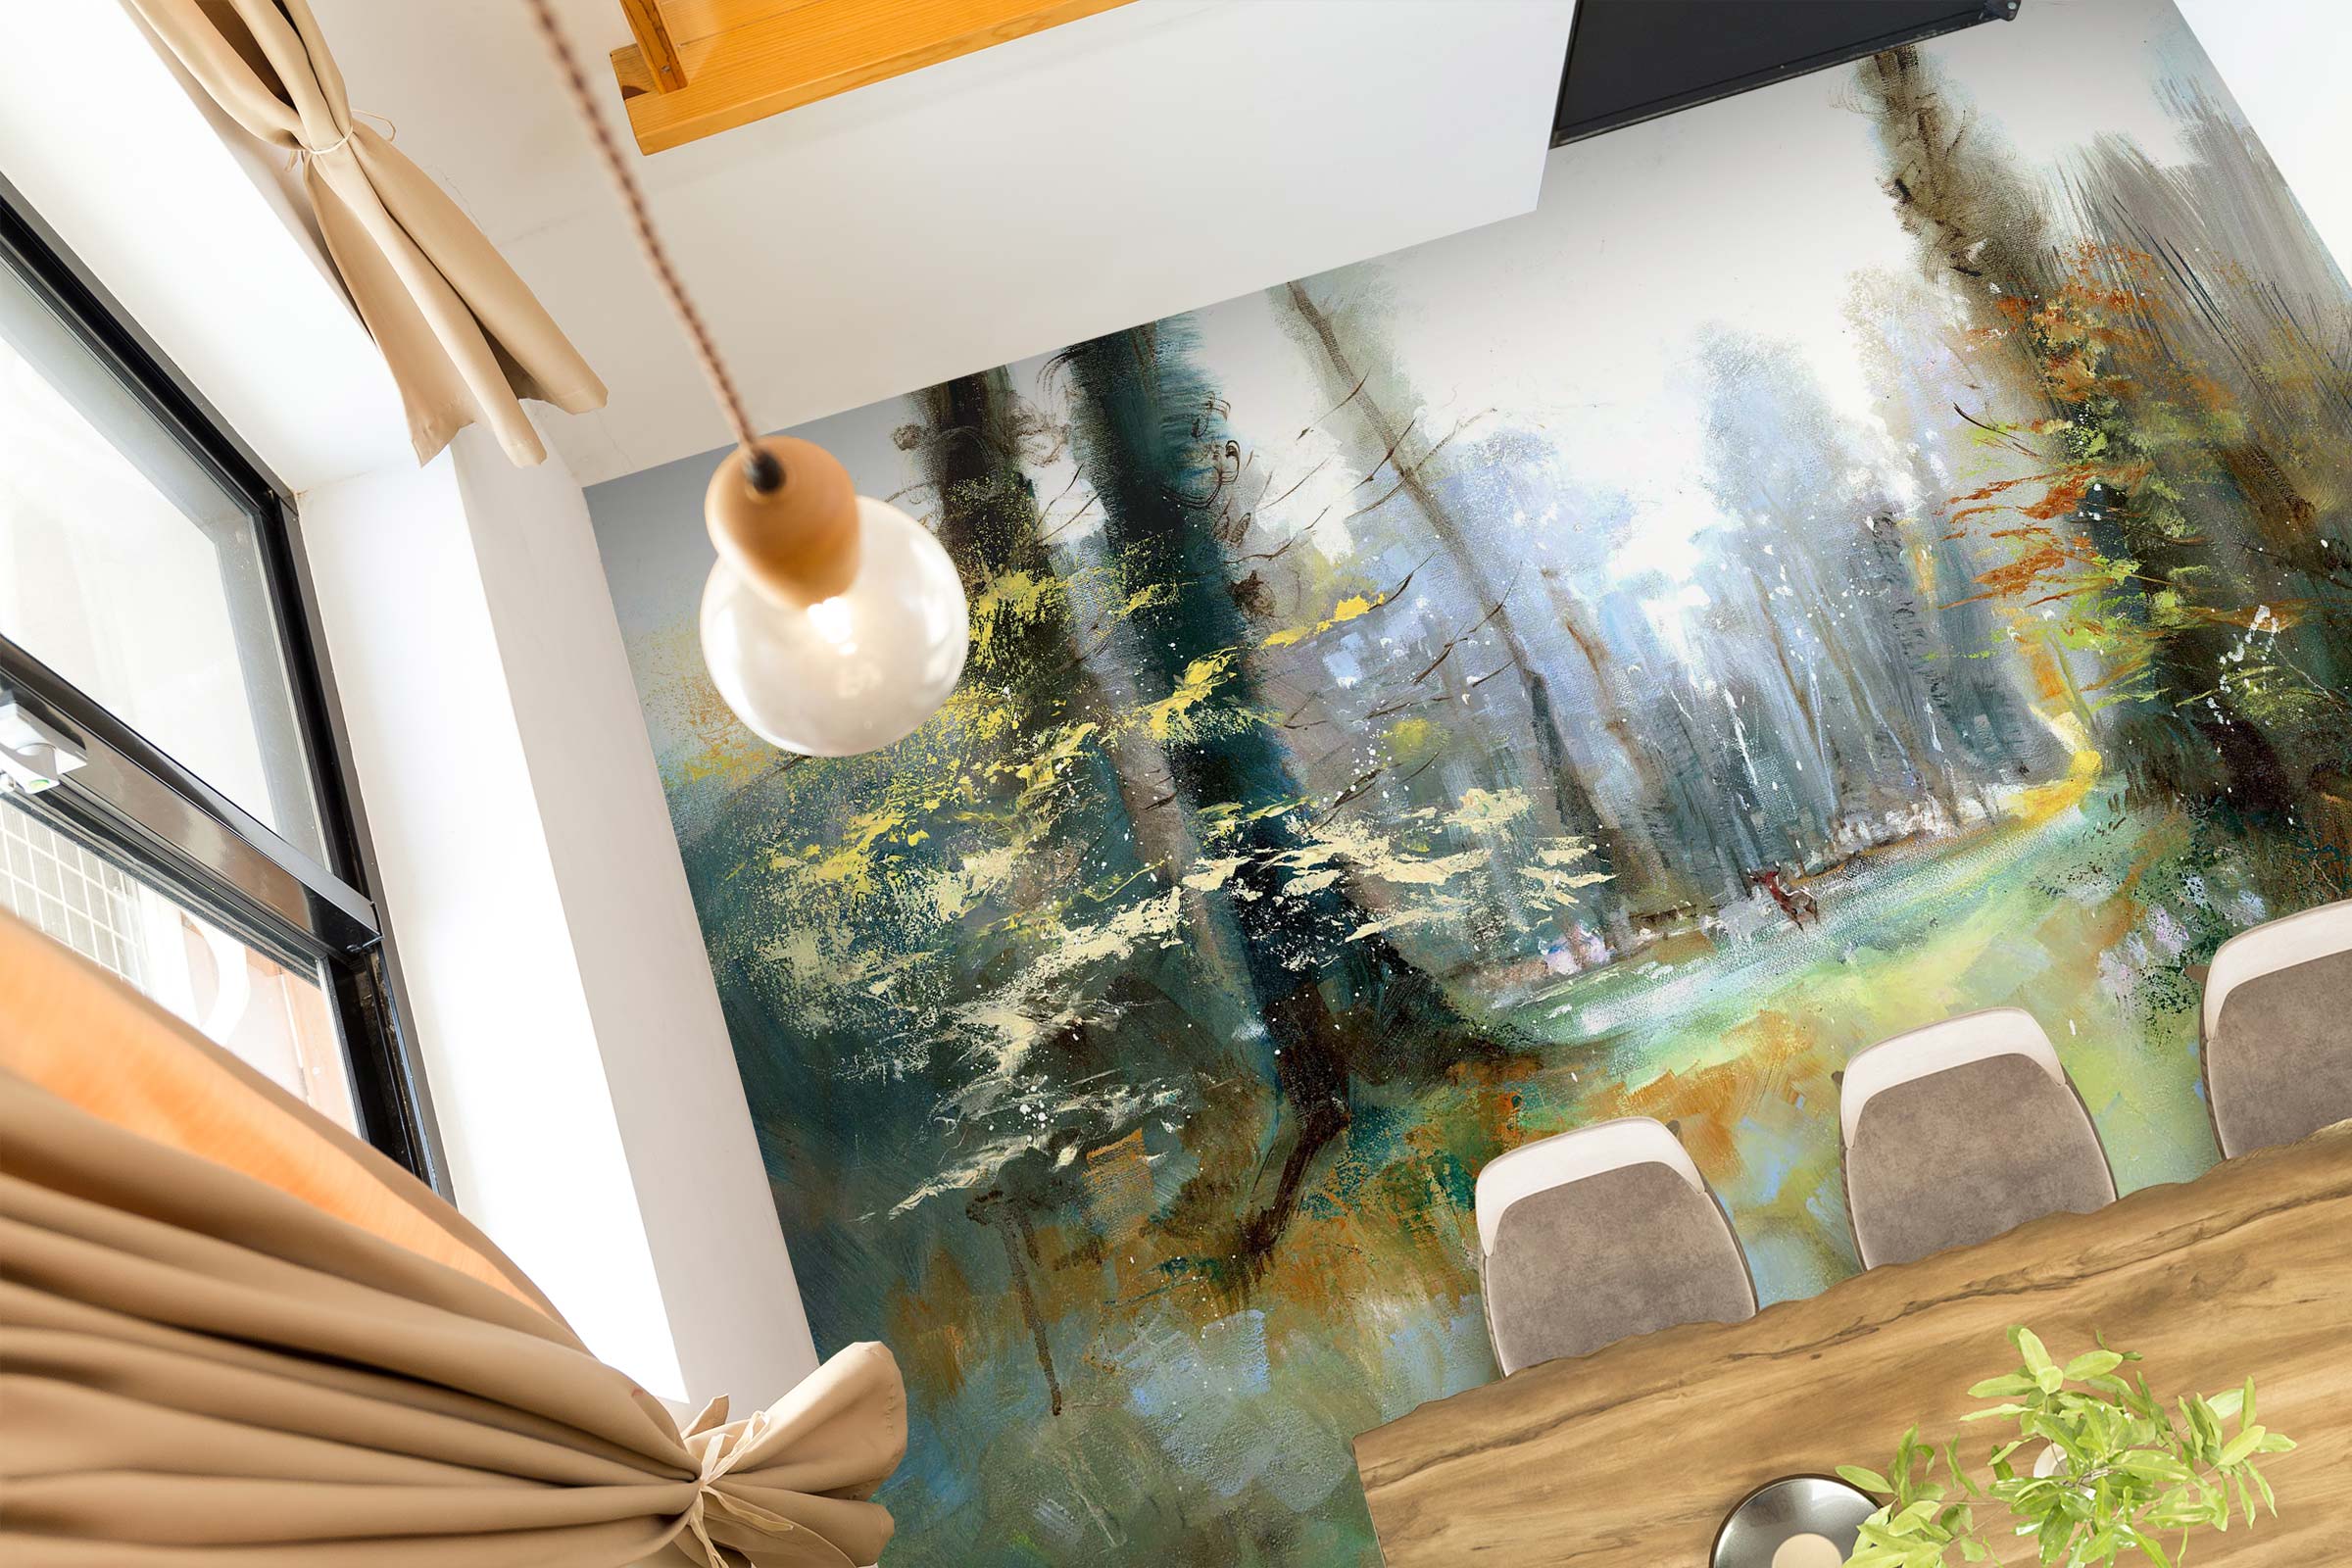 3D Trees Woods 99174 Anne Farrall Doyle Floor Mural  Wallpaper Murals Self-Adhesive Removable Print Epoxy